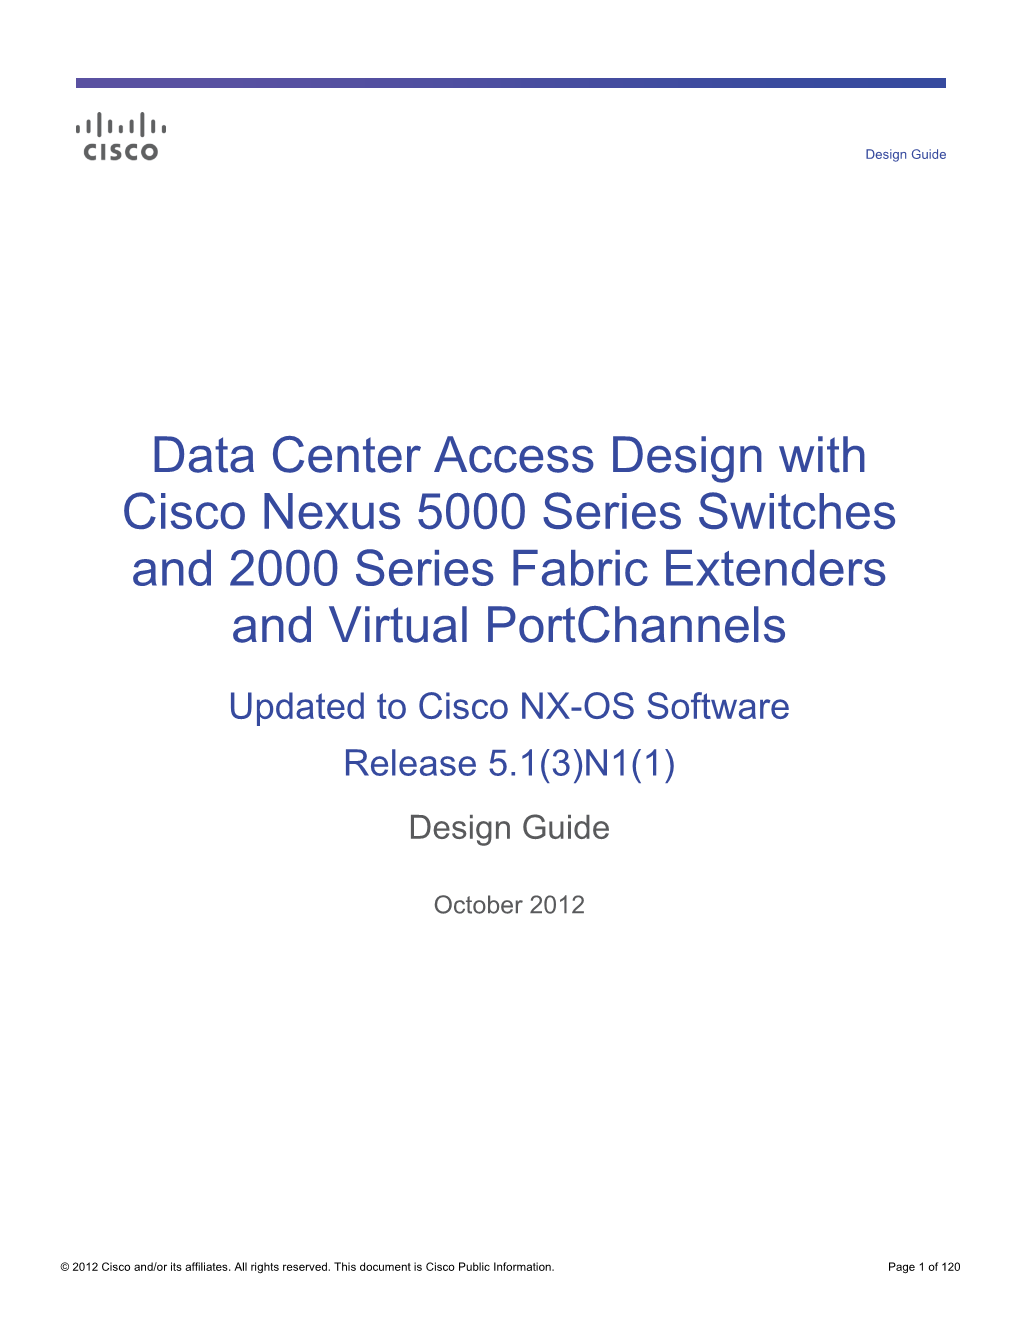 Data Center Access Design with Cisco Nexus 5000 Series Switches and 2000 Series Fabric Extenders and Virtual Portchannels